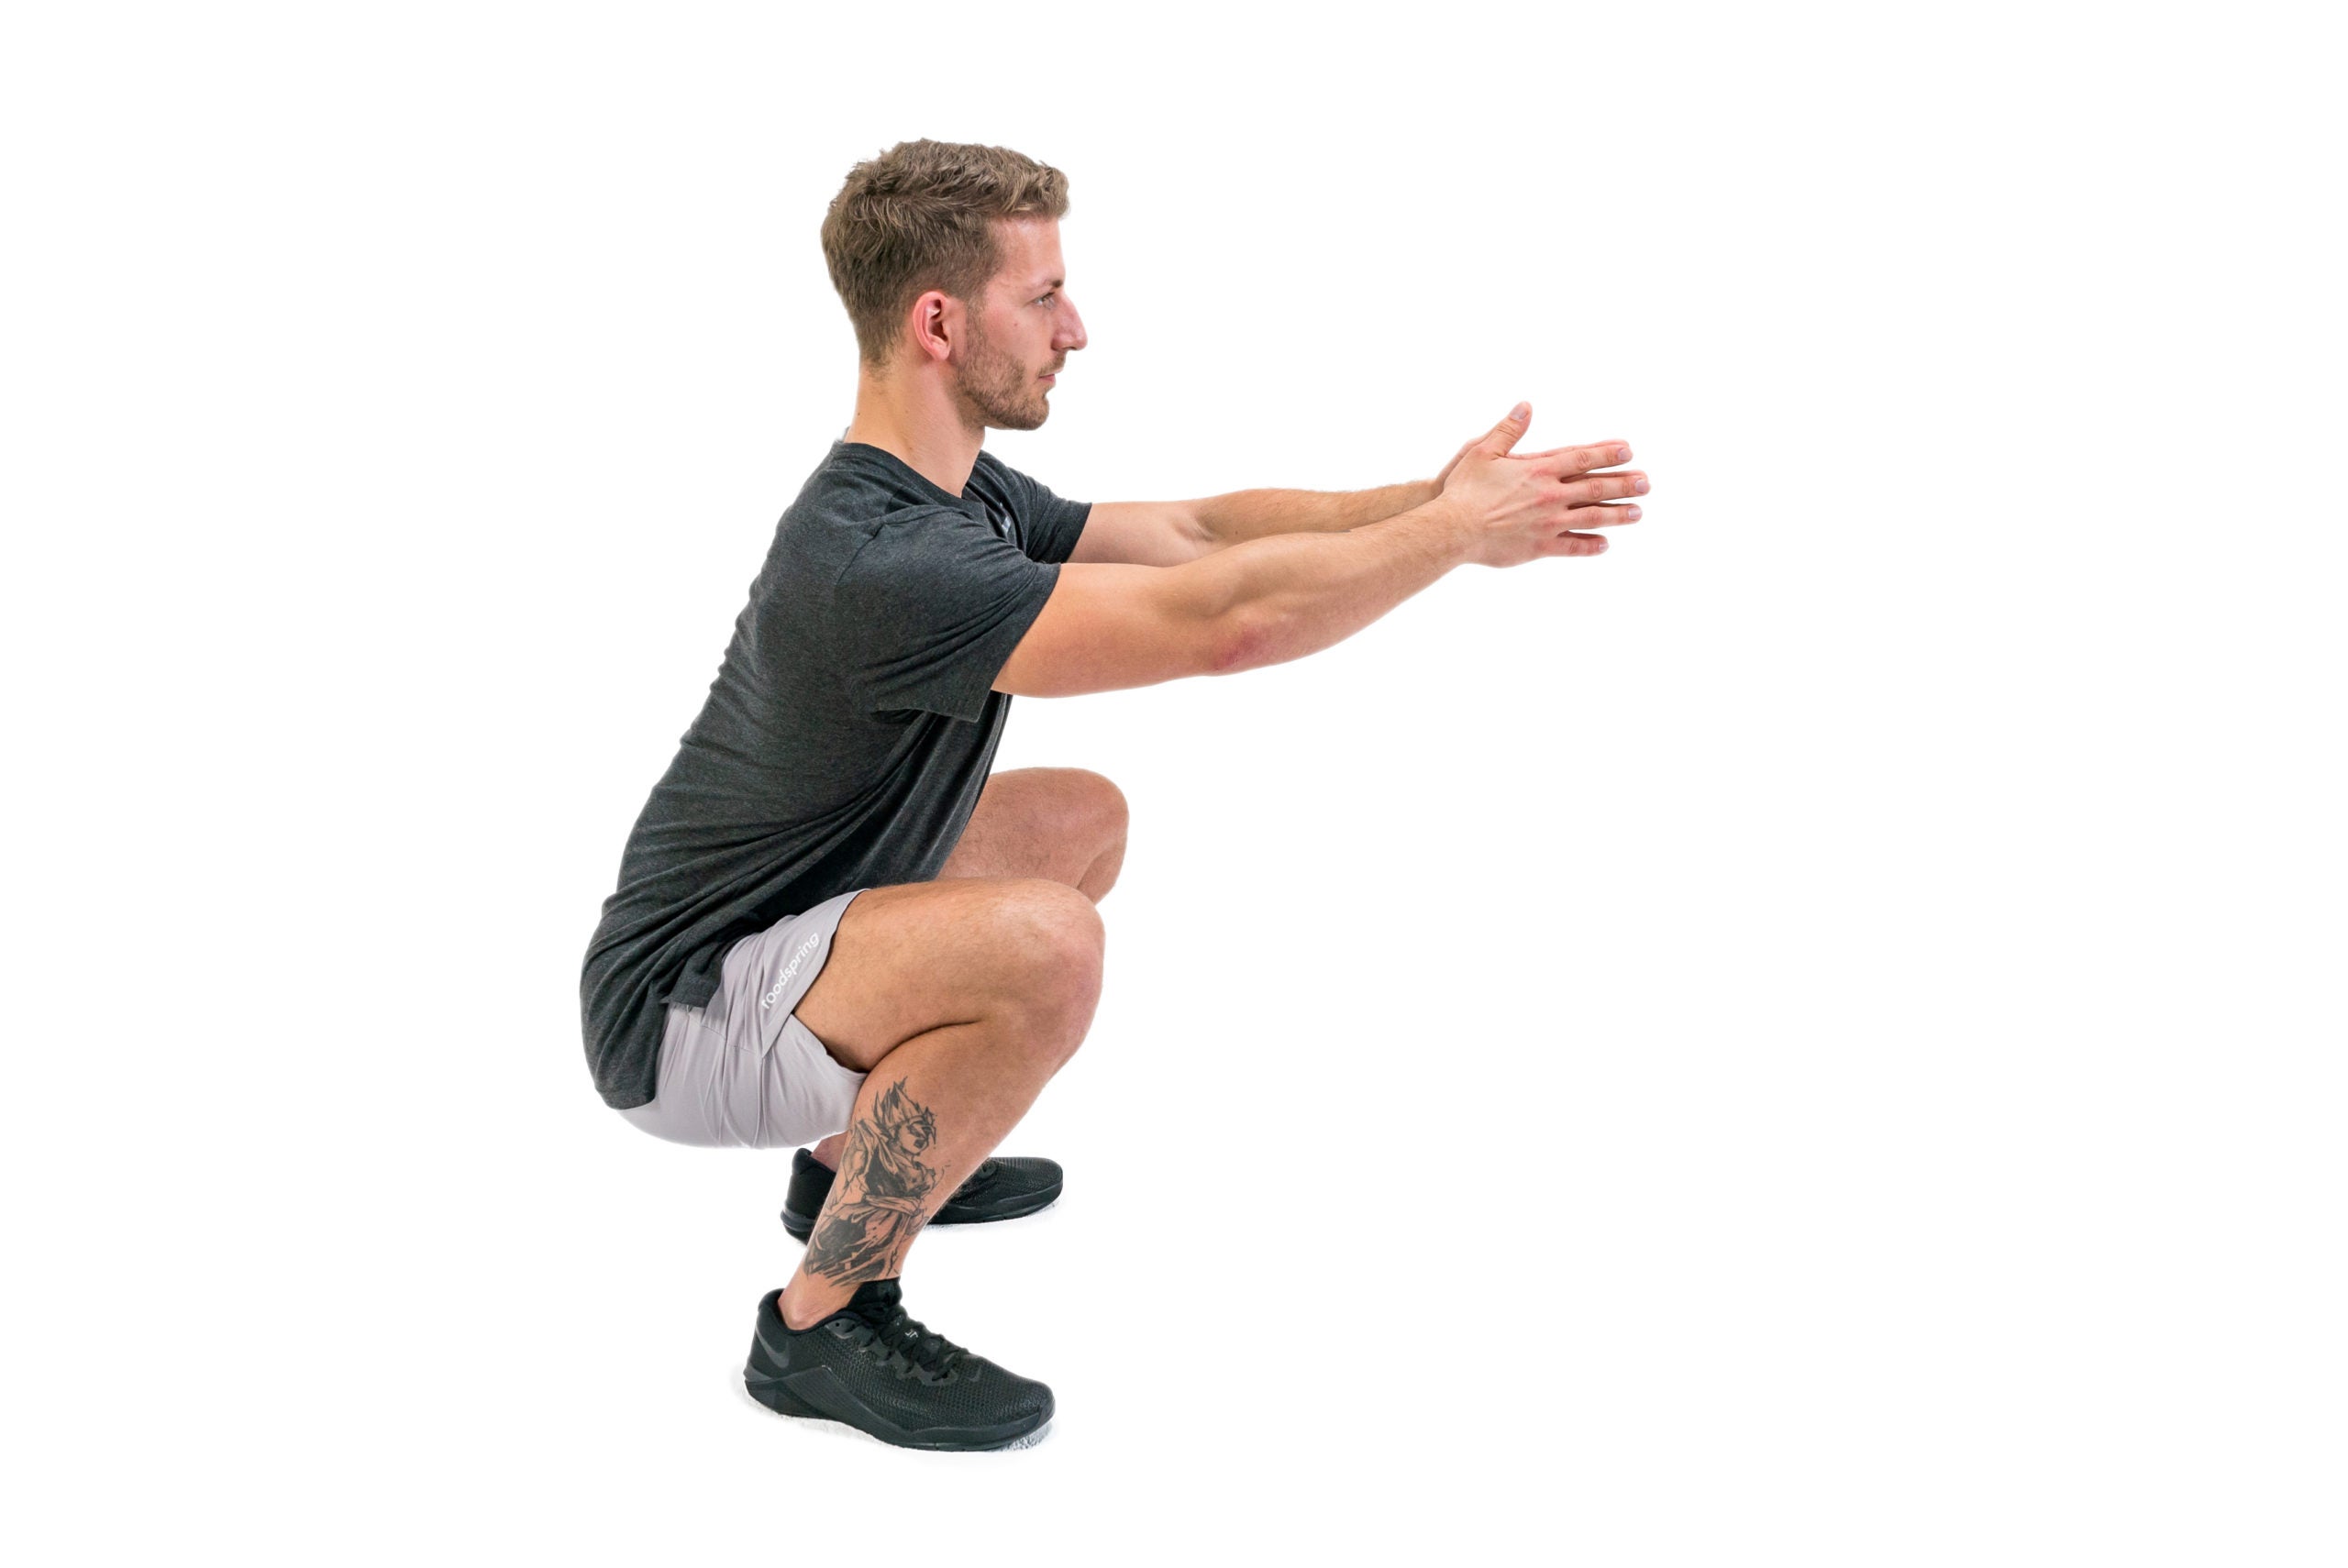 A white man in a black t-shirt and gray gym shorts demonstrates the appropriate ending position for an air squat. His arms are stretched in front of him, his knees fully bent and his calves touching his thighs. His back is straight and his rear end is as close to the ground as he can get it.